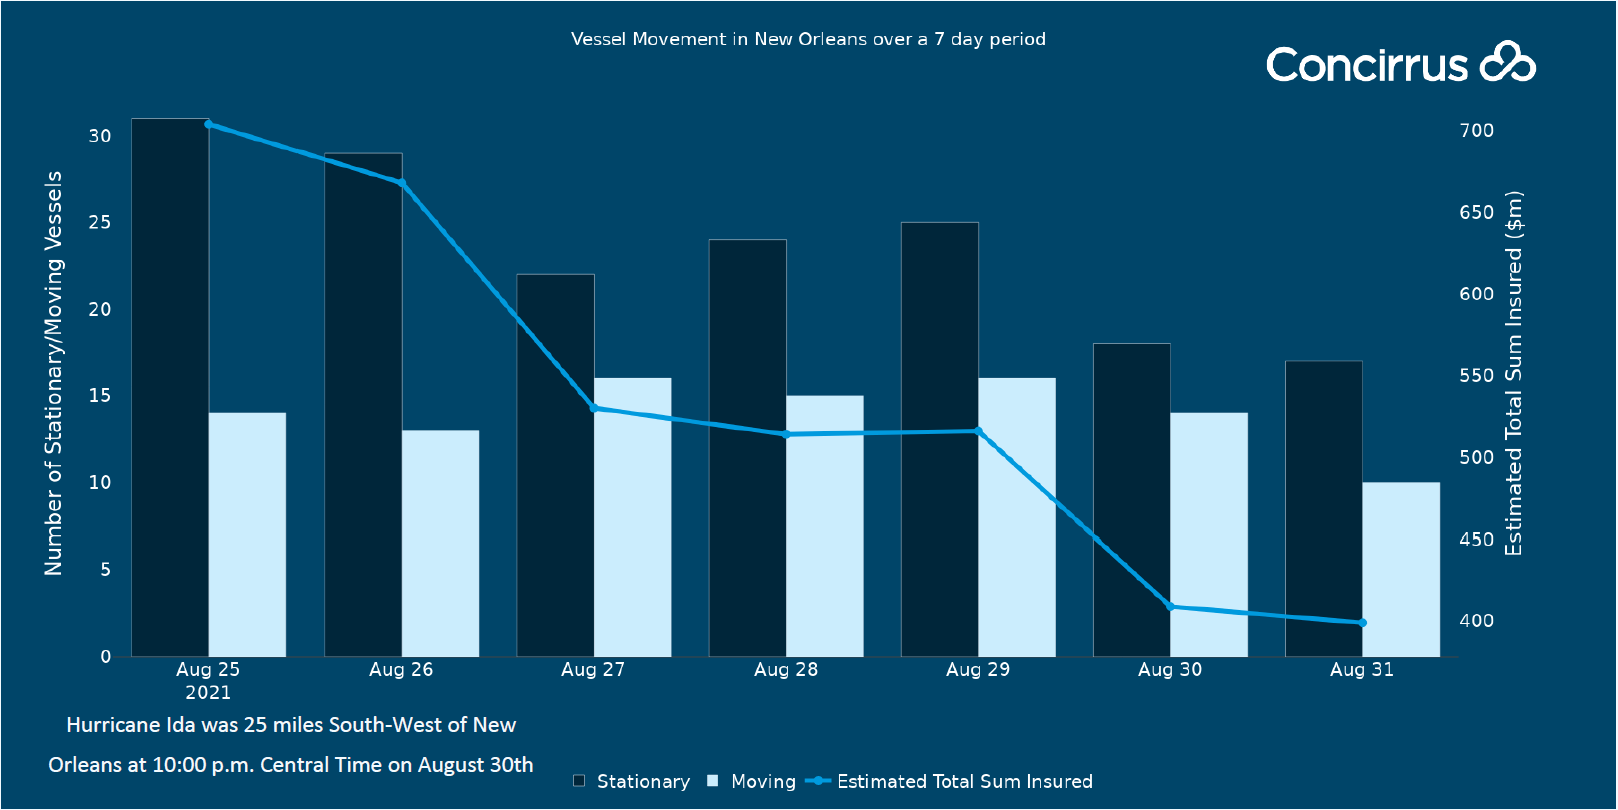 Port of New Orleans Vessel Movement graph